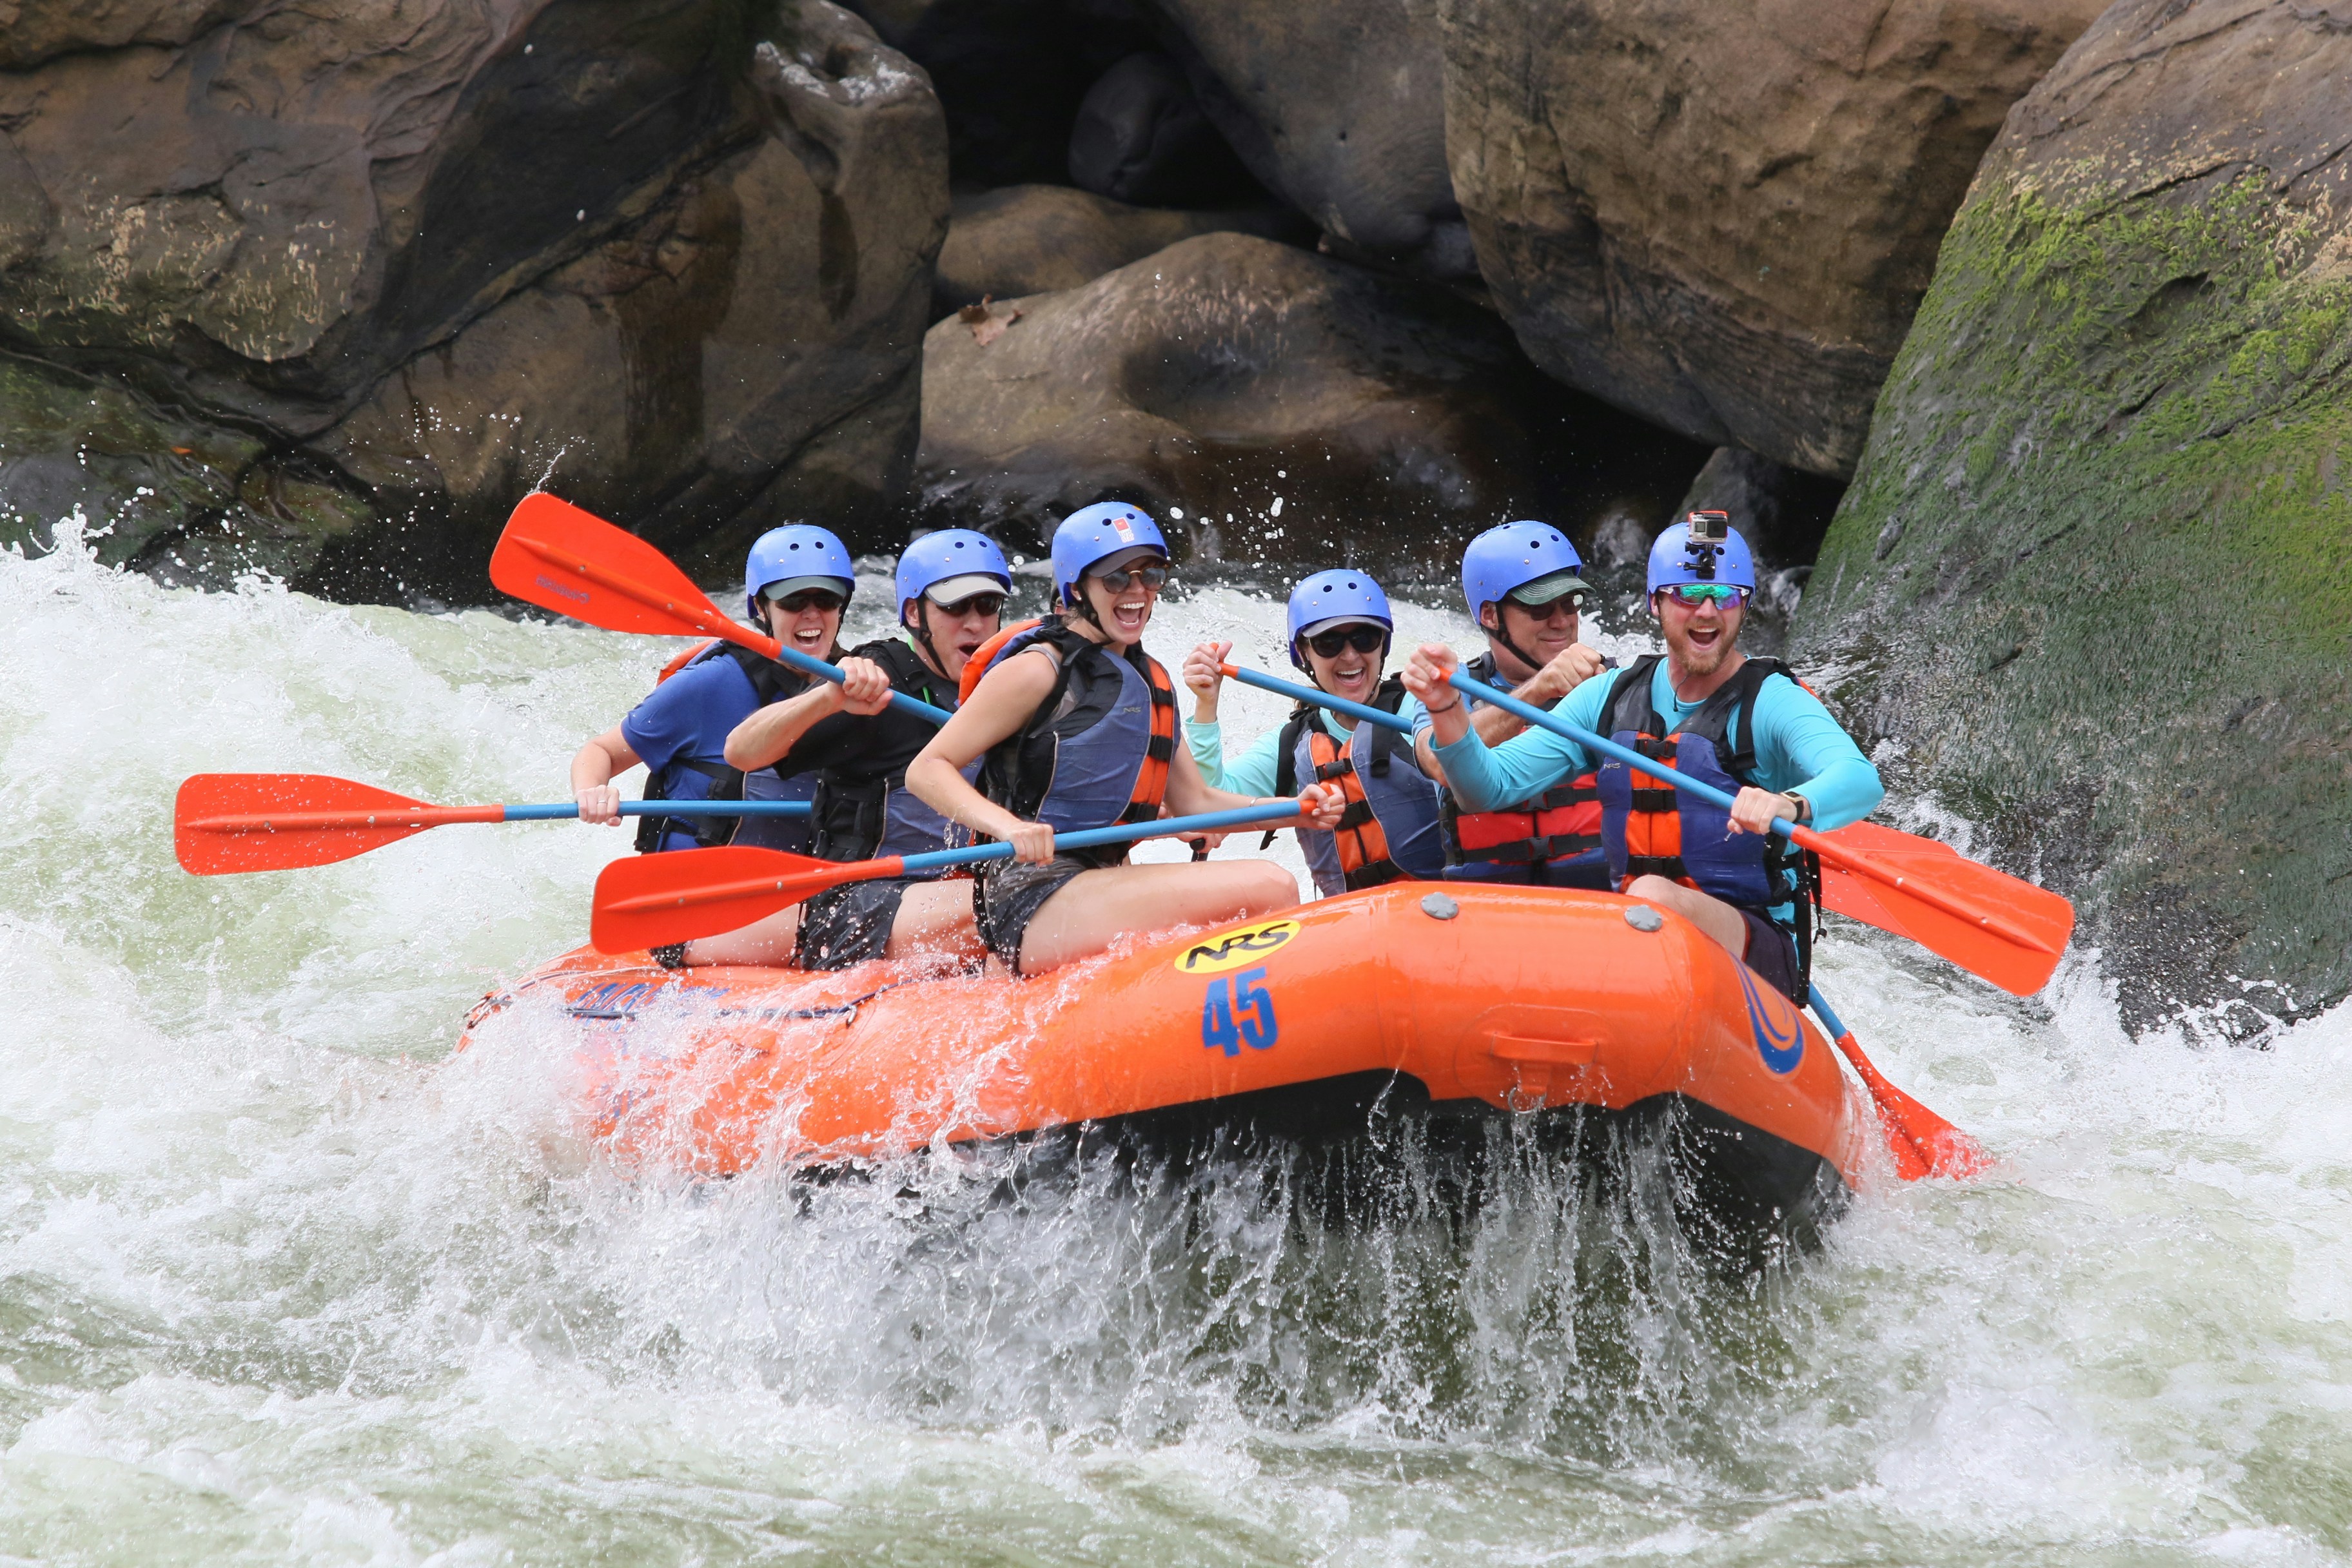 great photo recipe,how to photograph experiencing an amazing activity of whitewater rafting on the new river gorge in west virginia. great family-friendly fun and heart-racing adventure. it's the ultimate outdoor experience.; people riding orange kayak on river during daytime